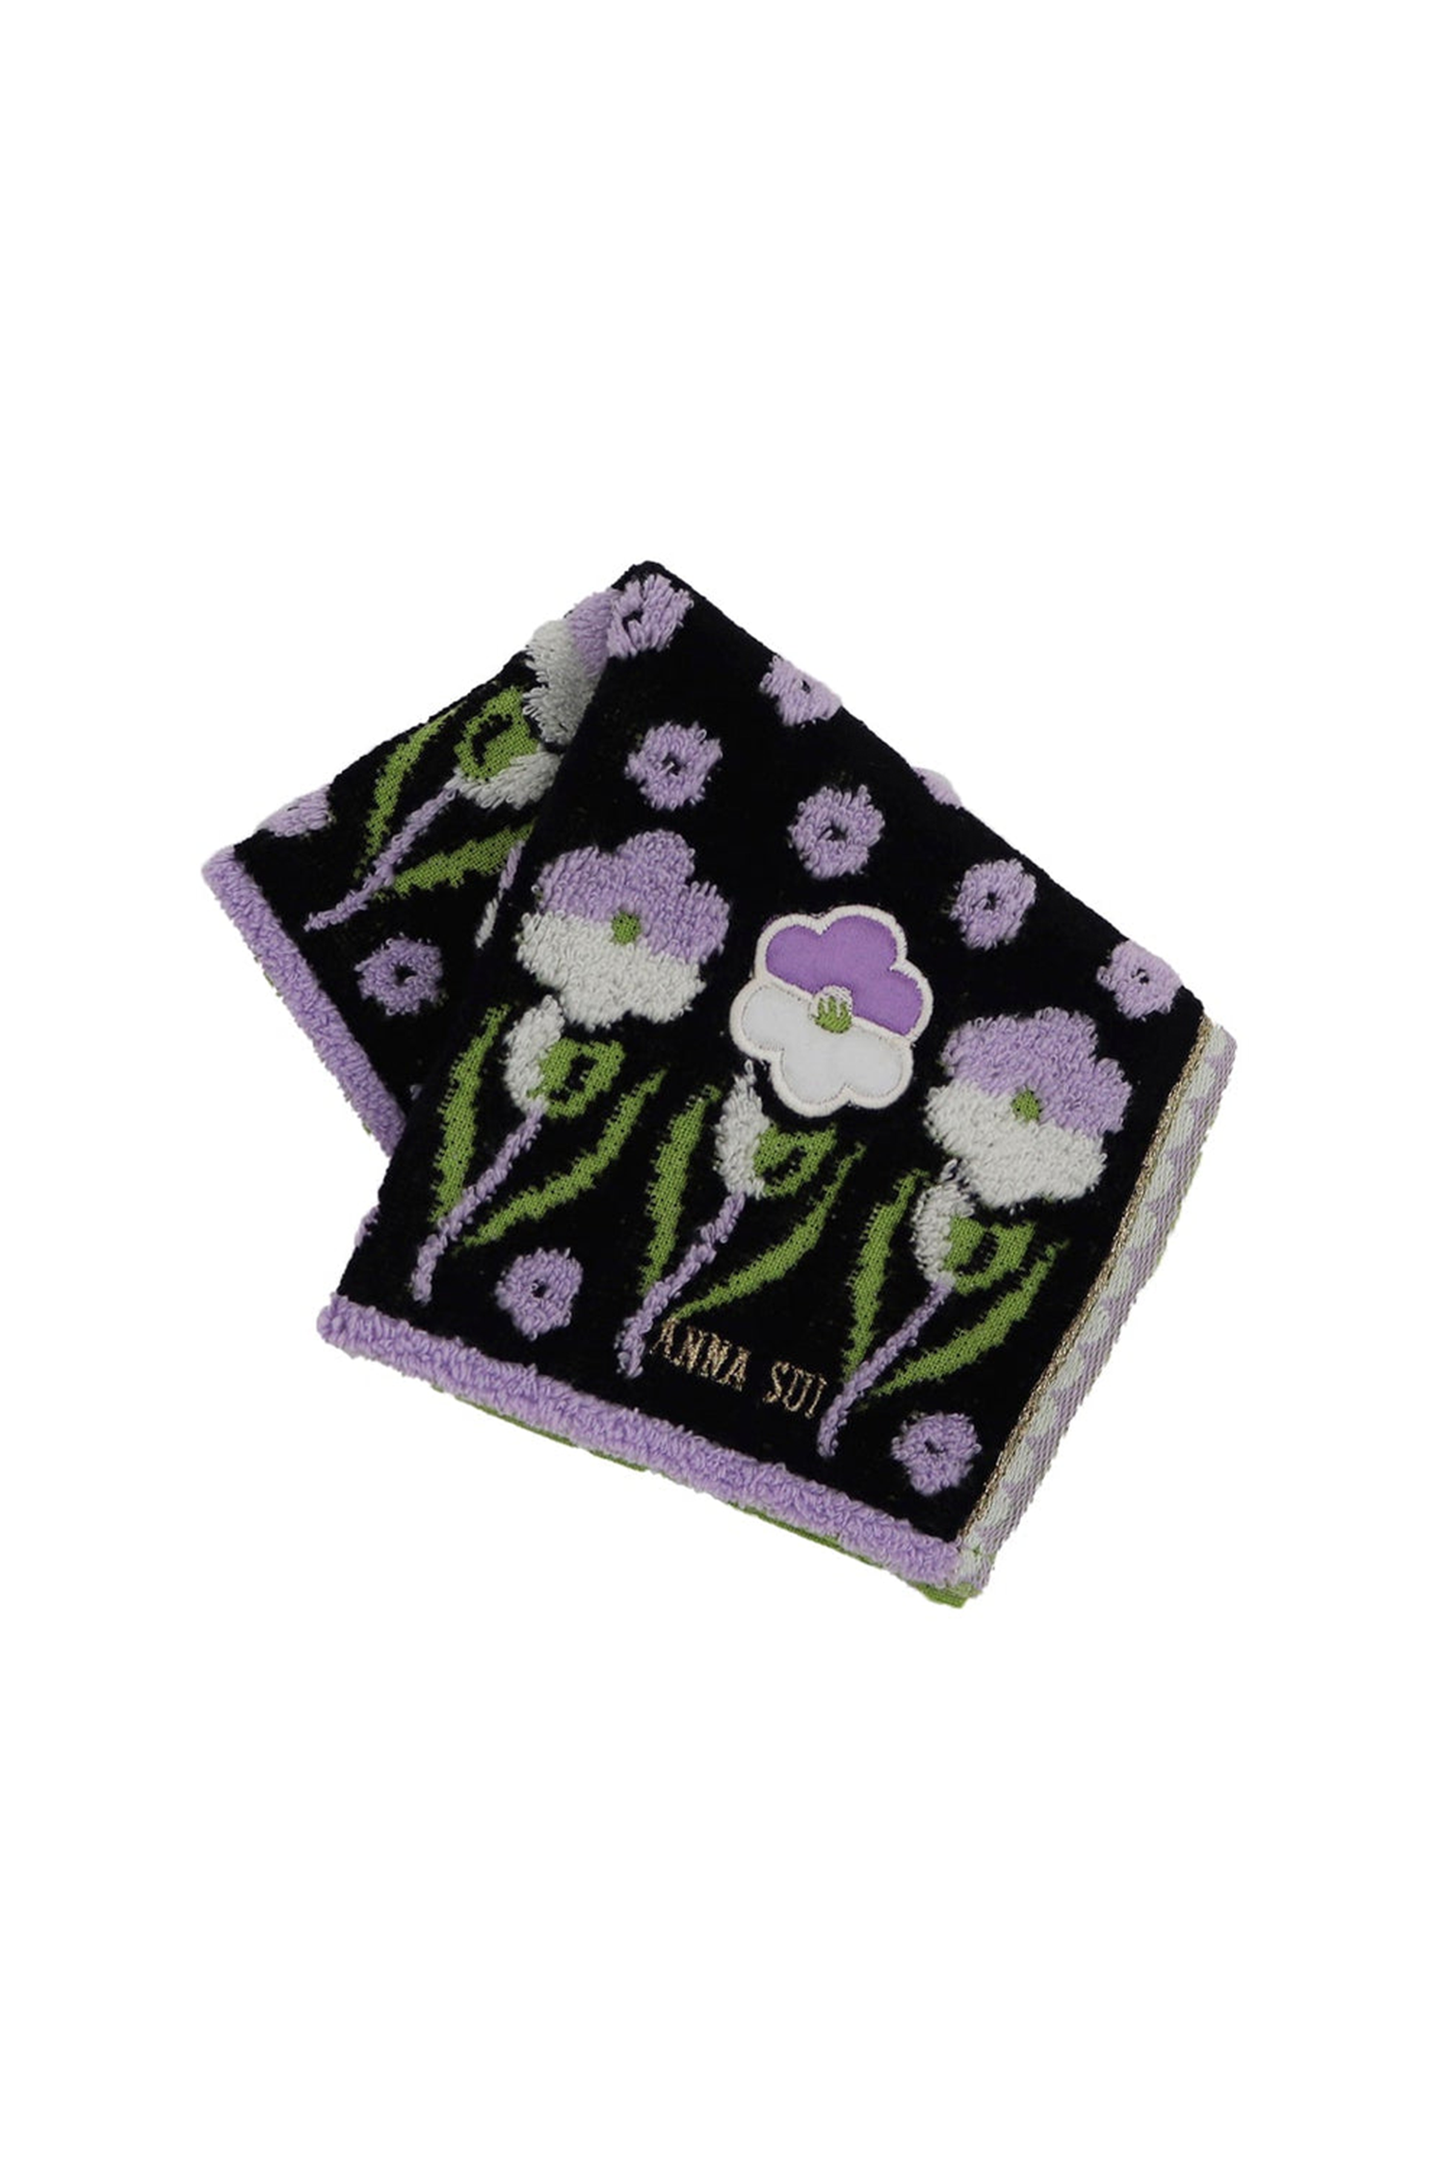 Pansy Panel Washcloth, black with lines of white/purple Pansy, Anna Sui label at bottom 